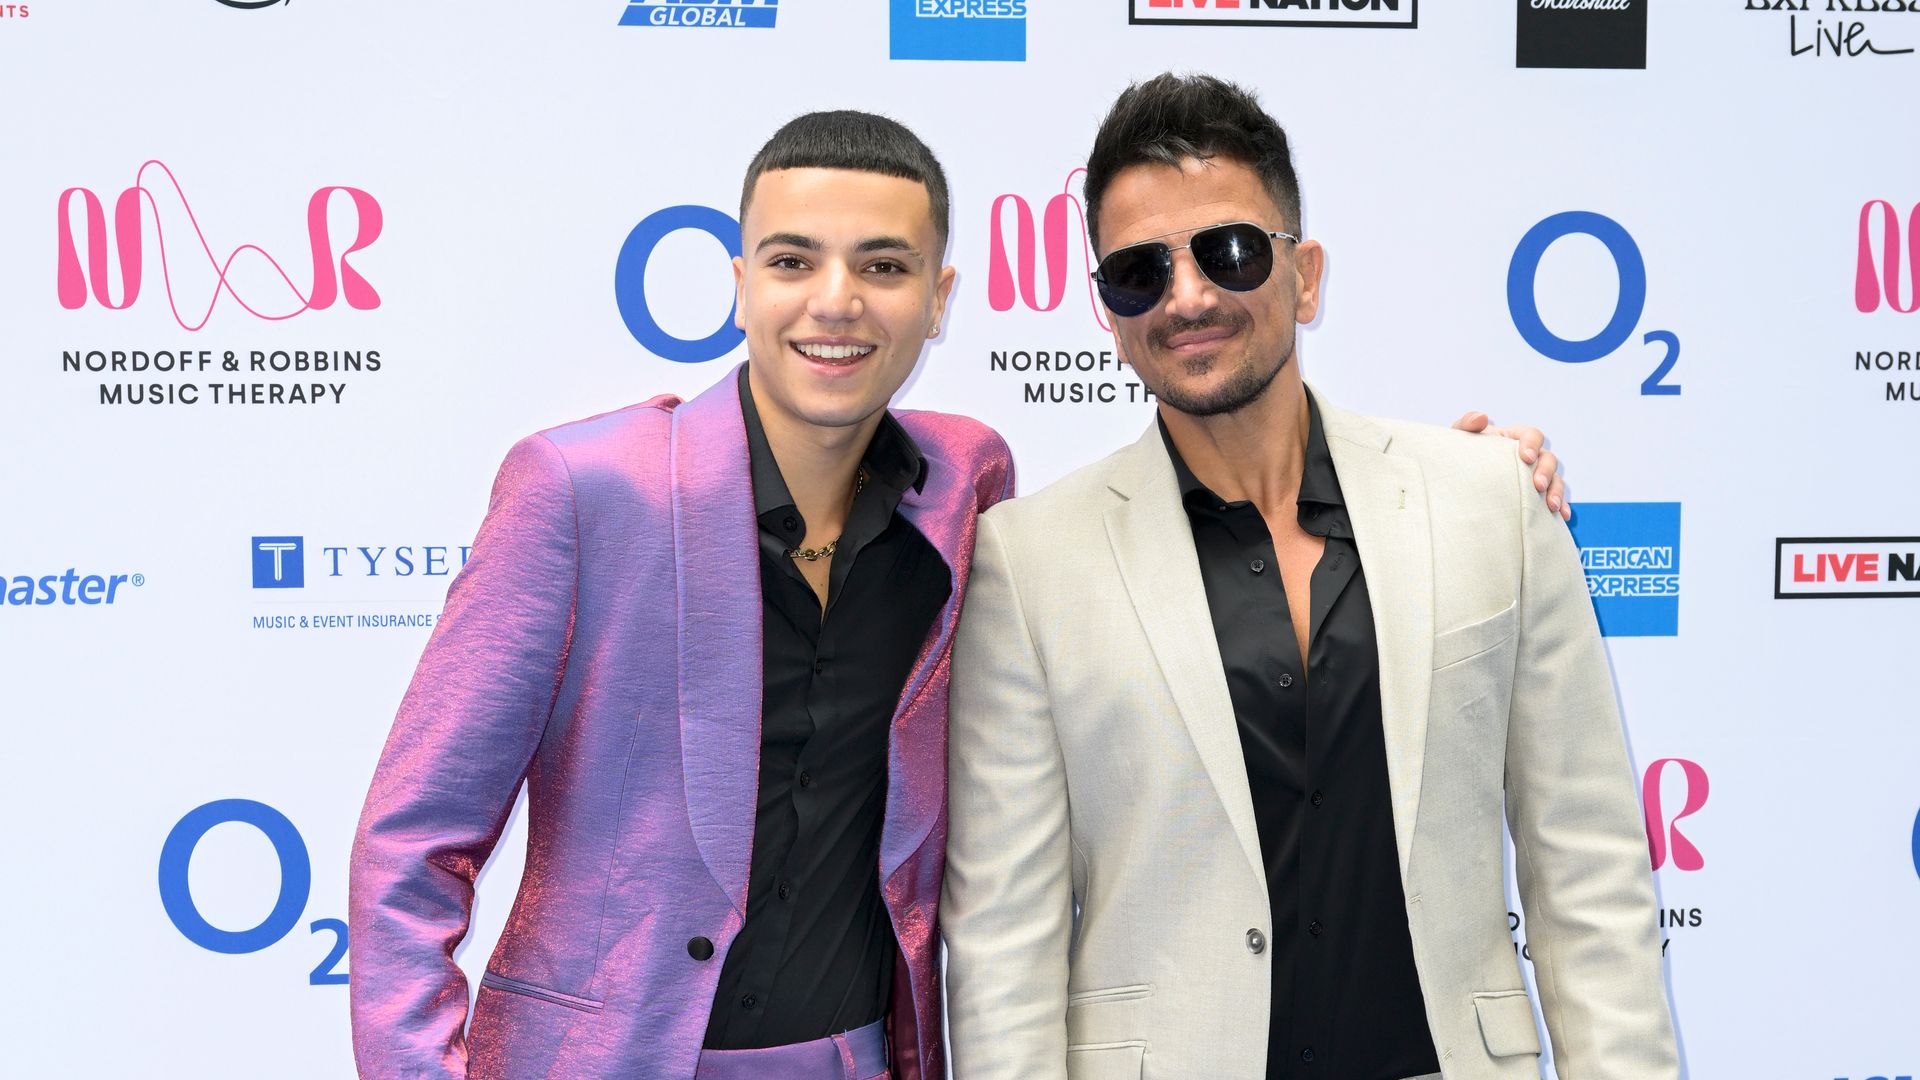 Junior Andre in purple suit stood with Peter Andre in white suit